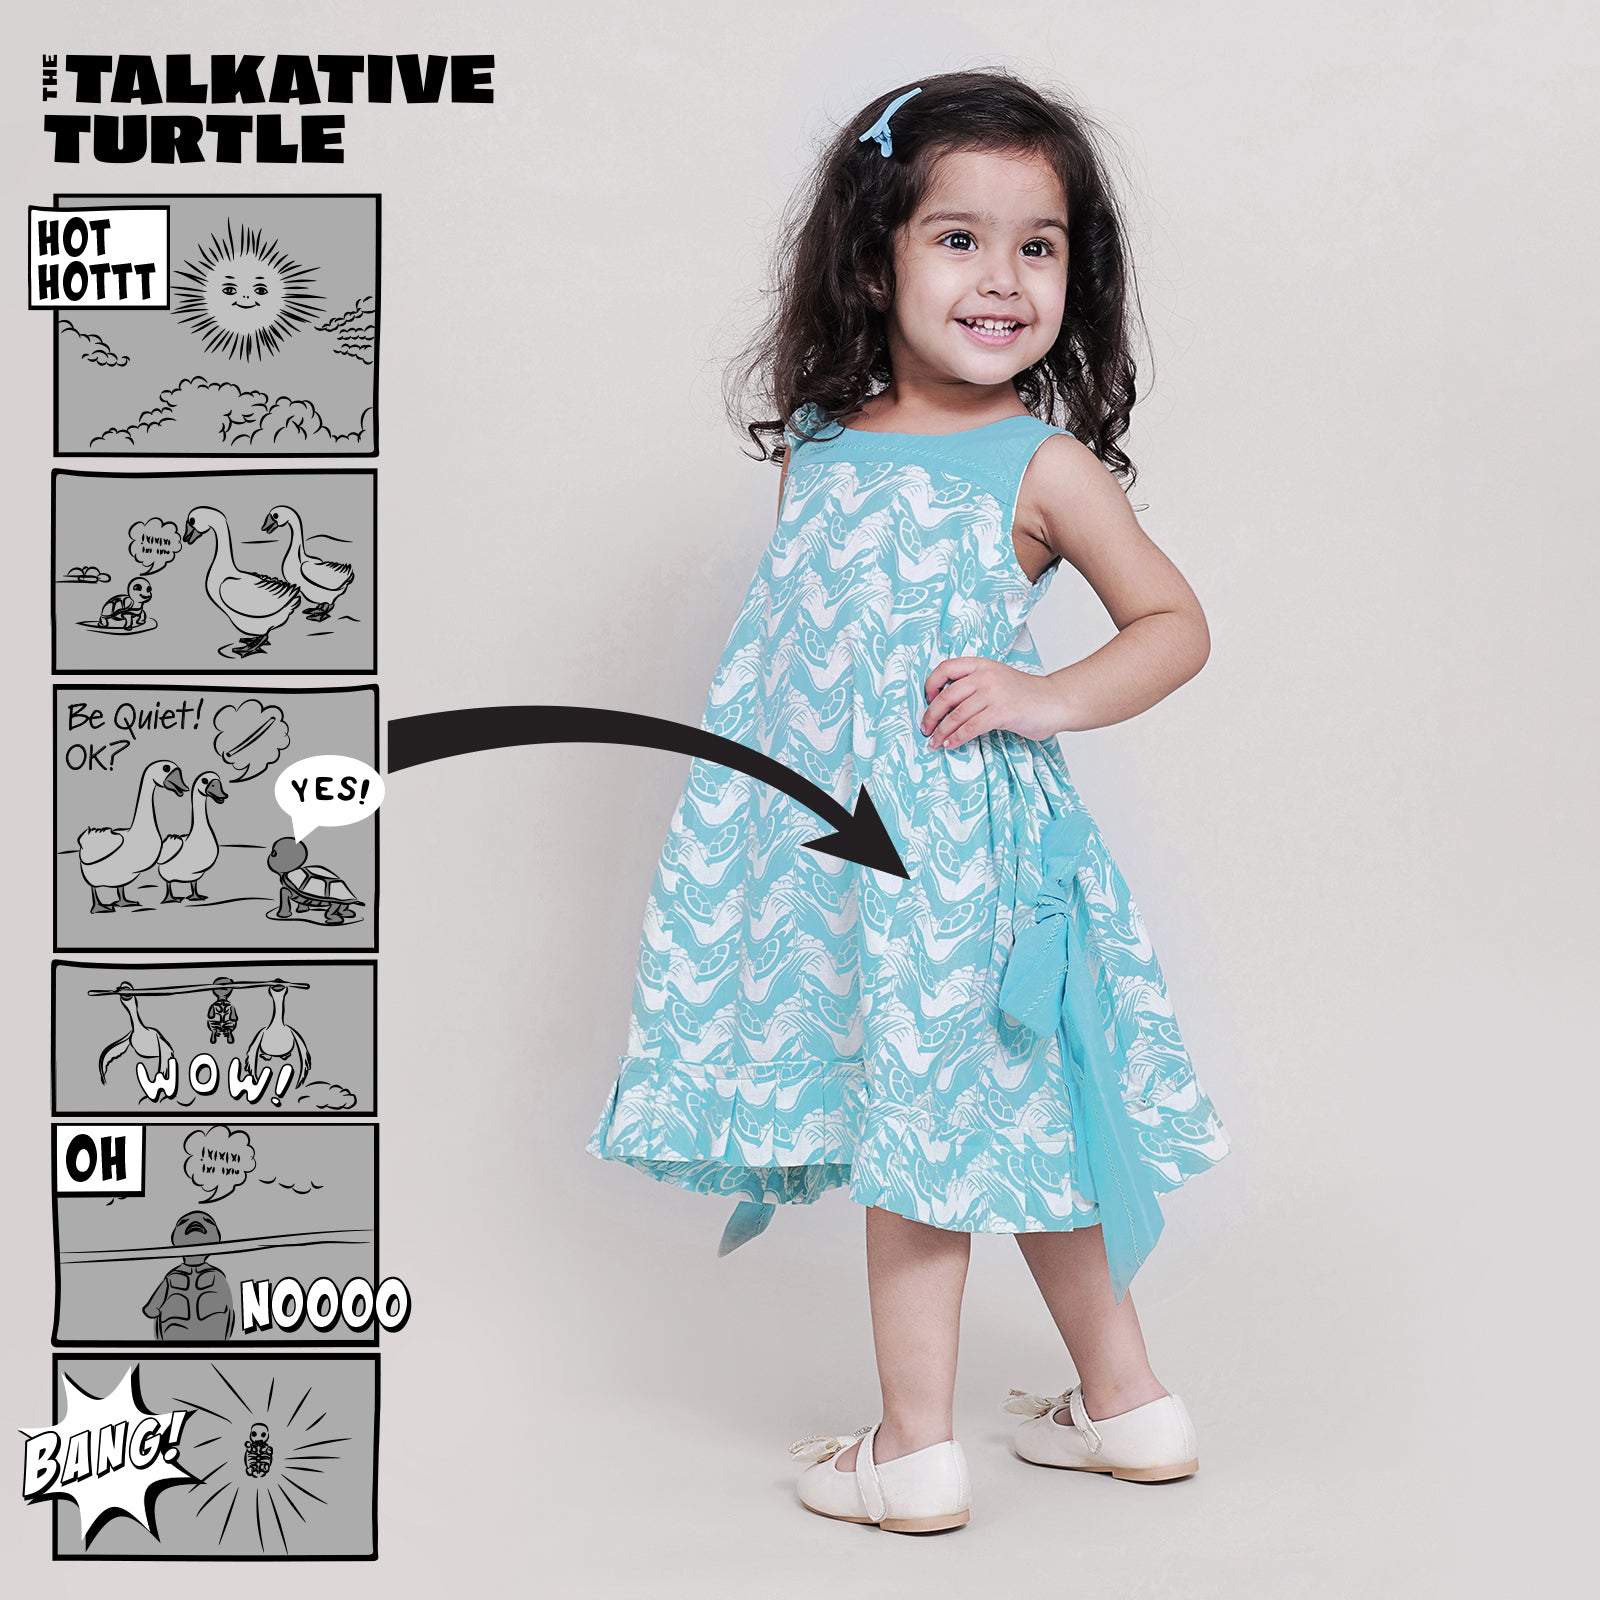 Cotton Side Bow & Gathered Dress For Girls with The Talkative Turtle Print